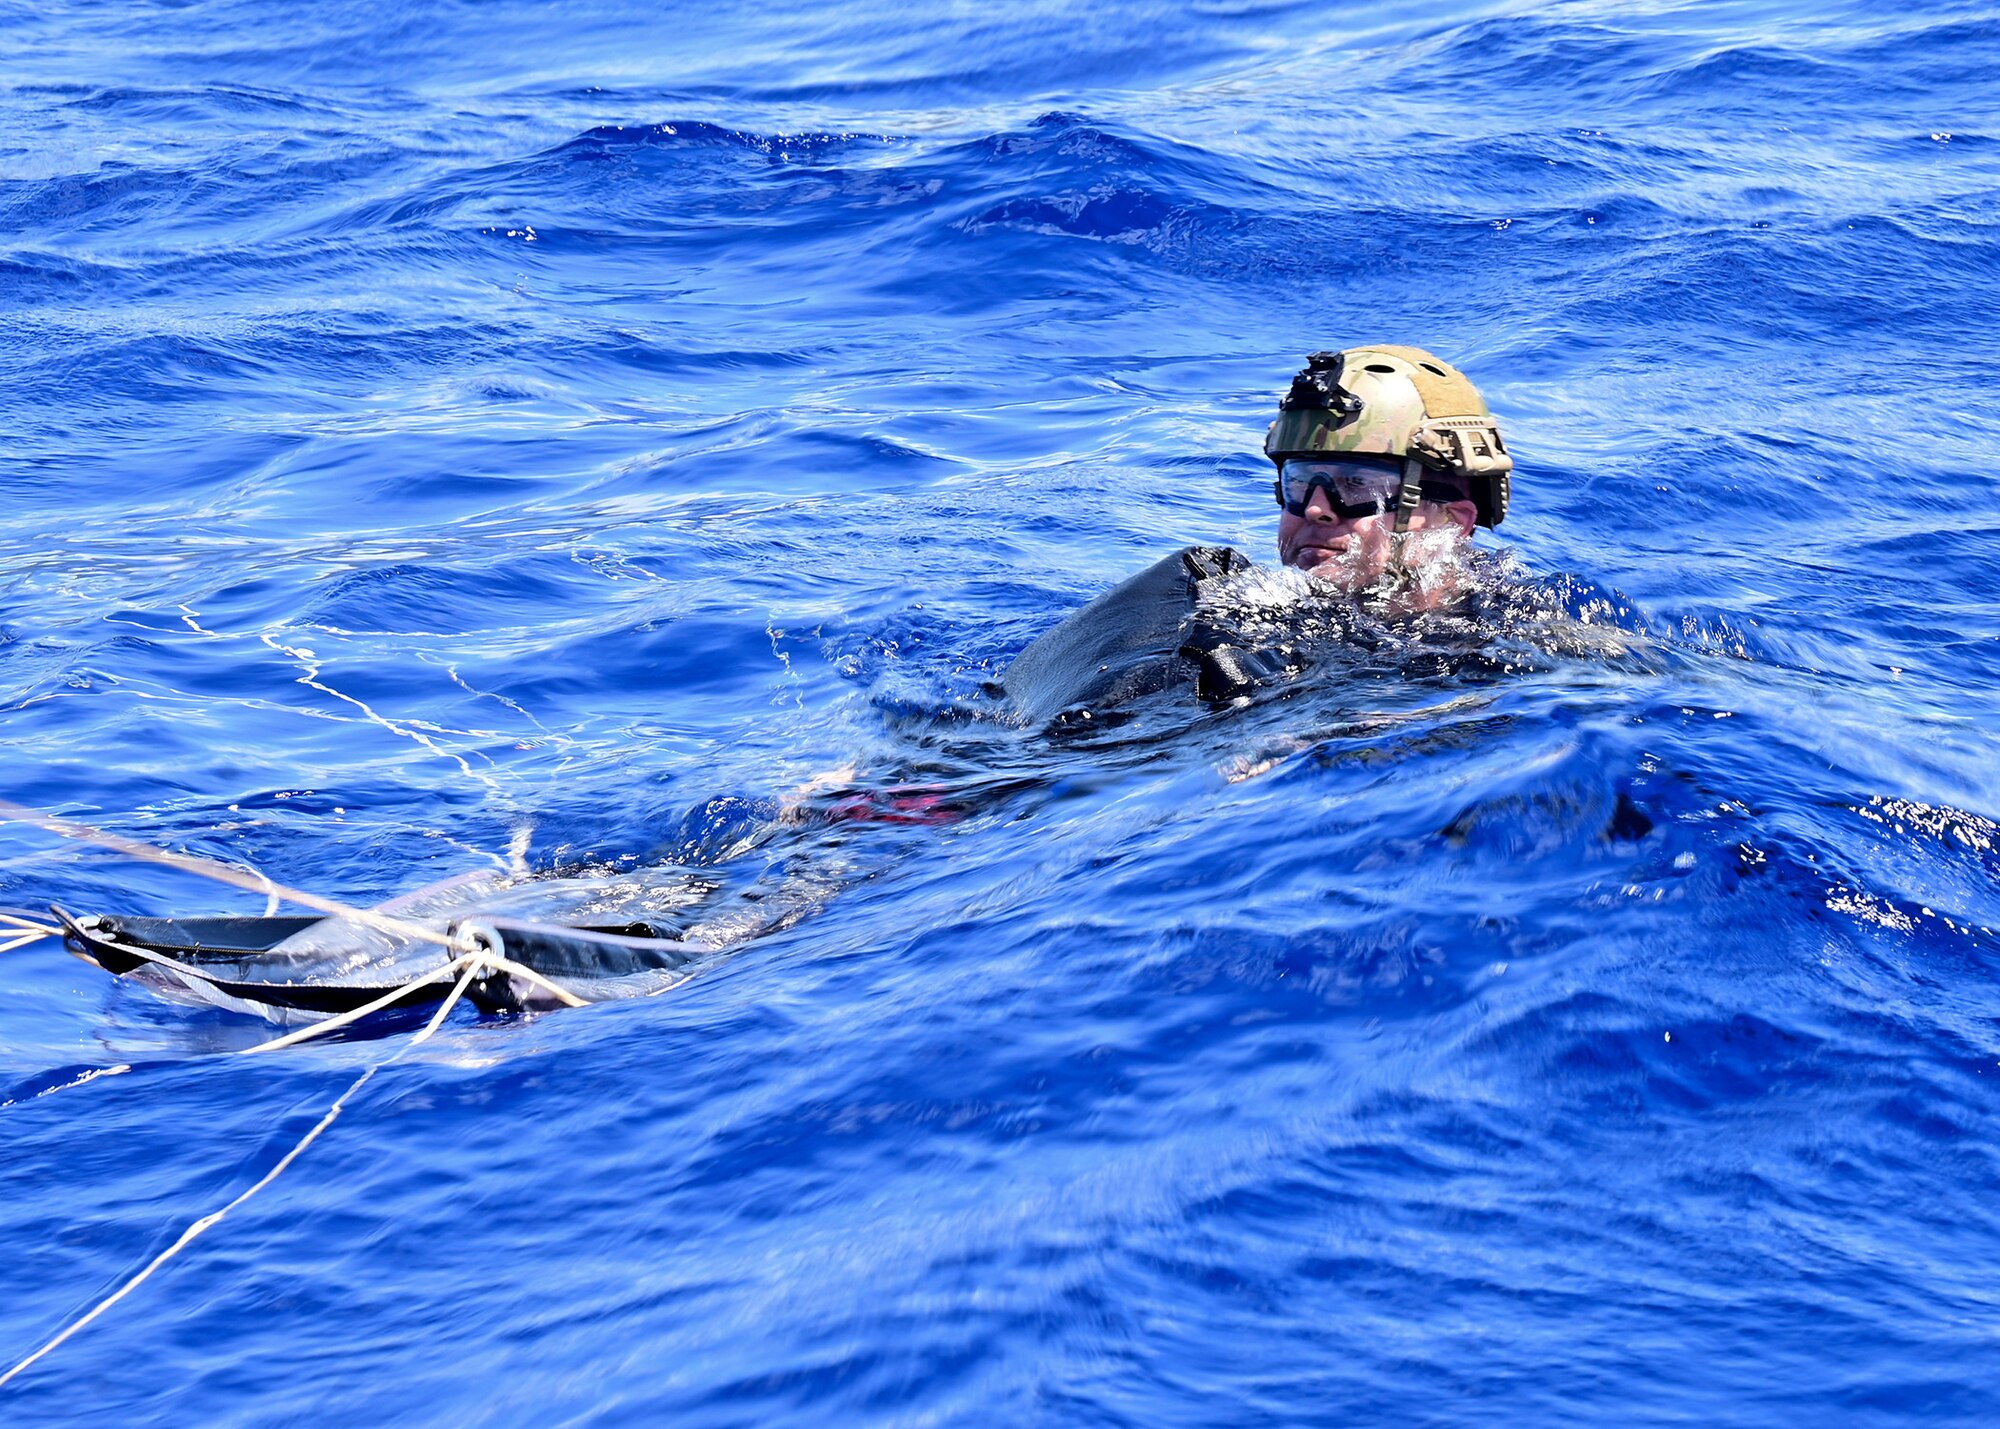 A Navy SEAL and his parachute land in the water